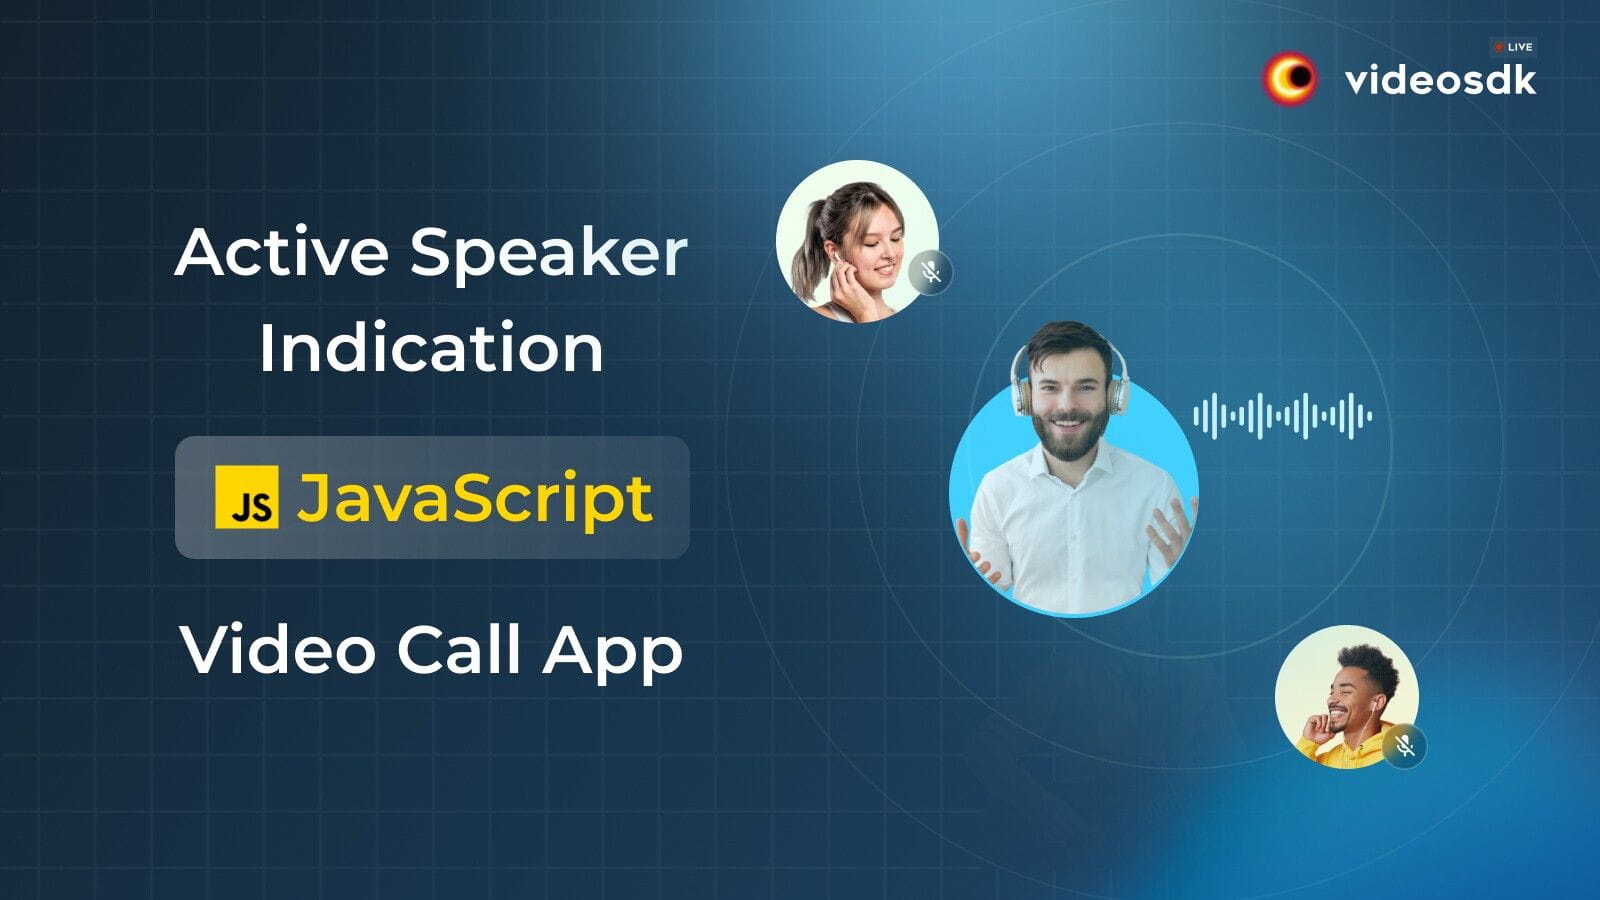 How to Integrate Active Speaker Indication in JavaScript Video call App?